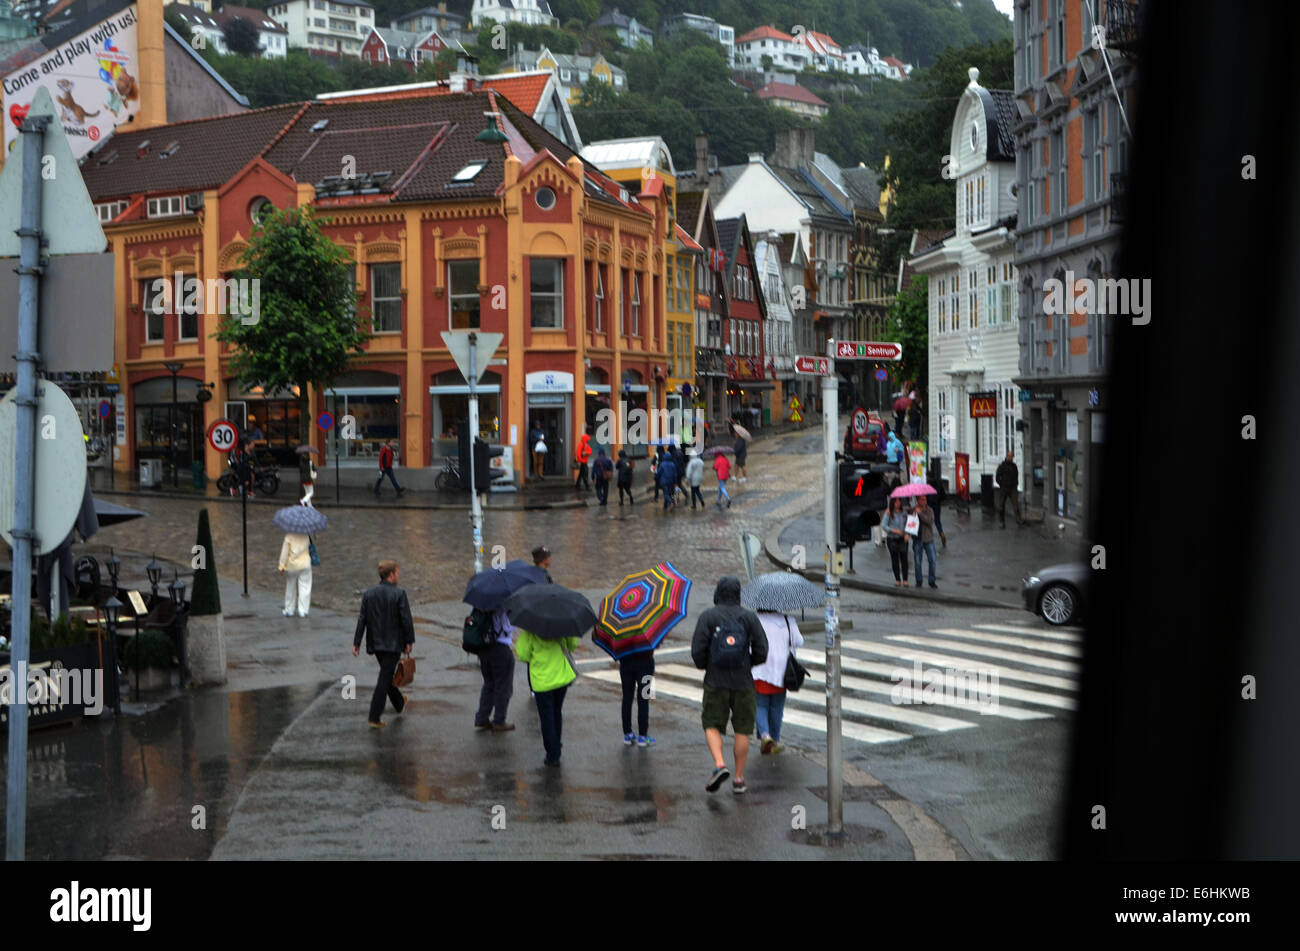 A rainy day in Bergen. It had been raining heavily all day, umbrellas were not much good against it.Seen from top of bus.Stalls Stock Photo